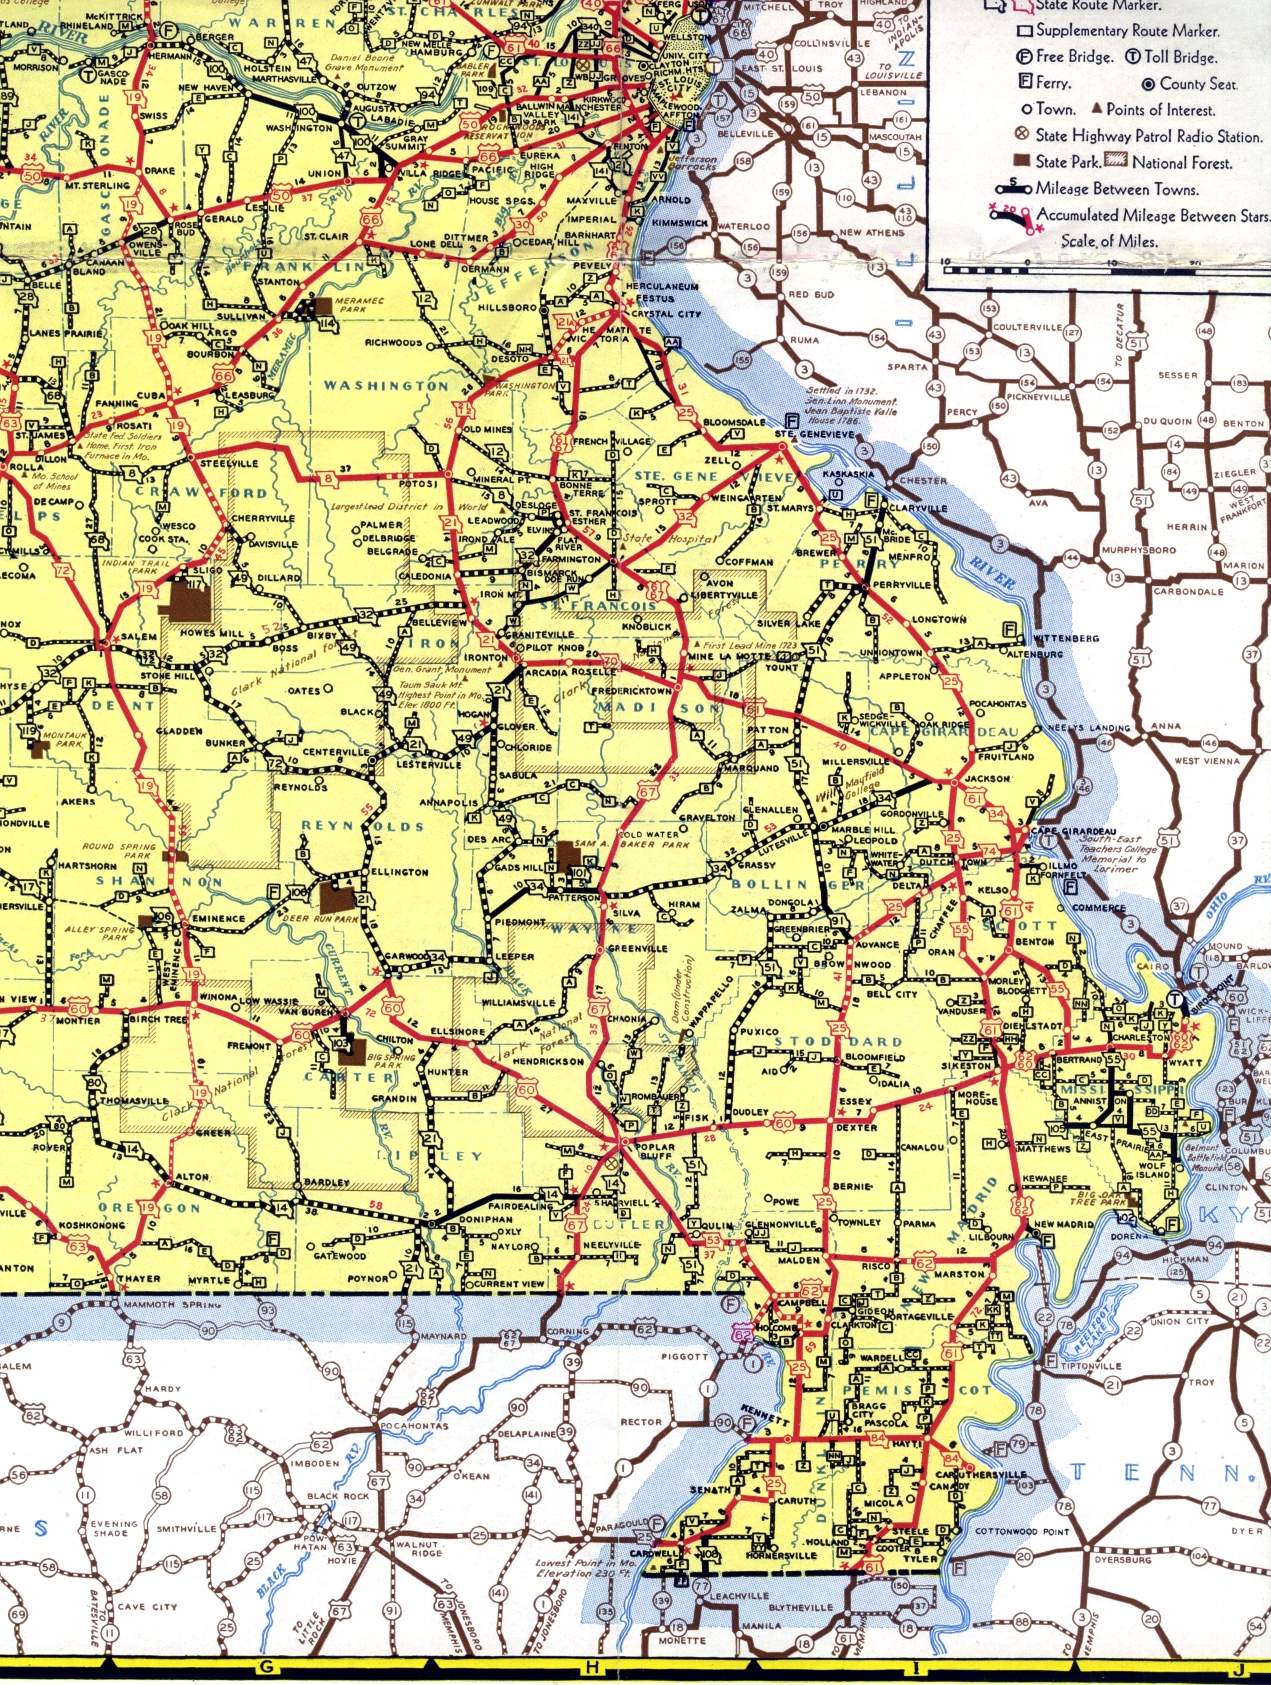 Section of 1940 official Missouri highway map